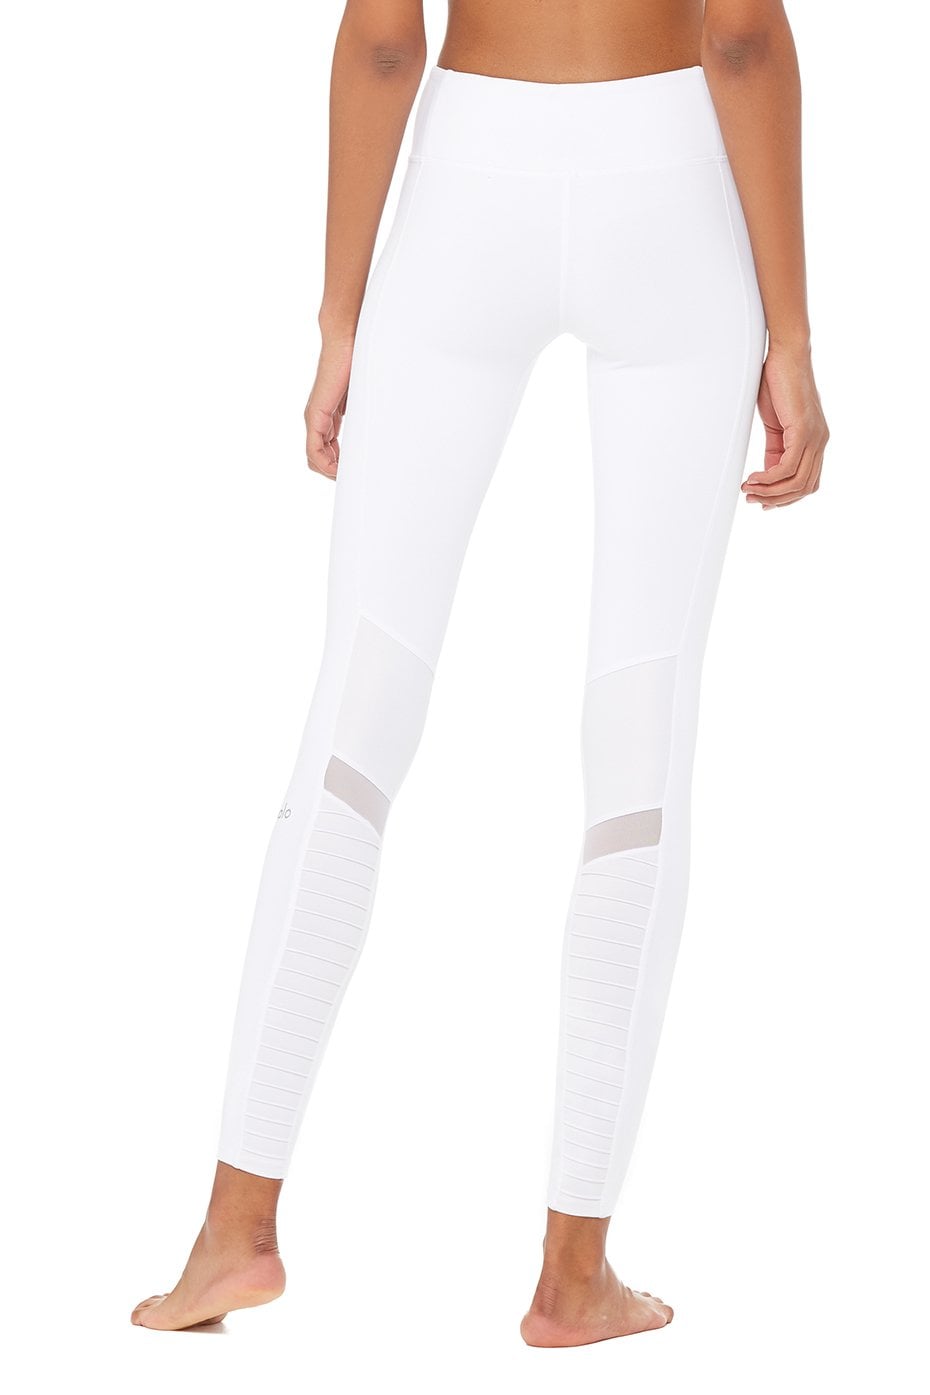 Lavento Ankle Length Workout White Yoga Stretch,Style:D19108